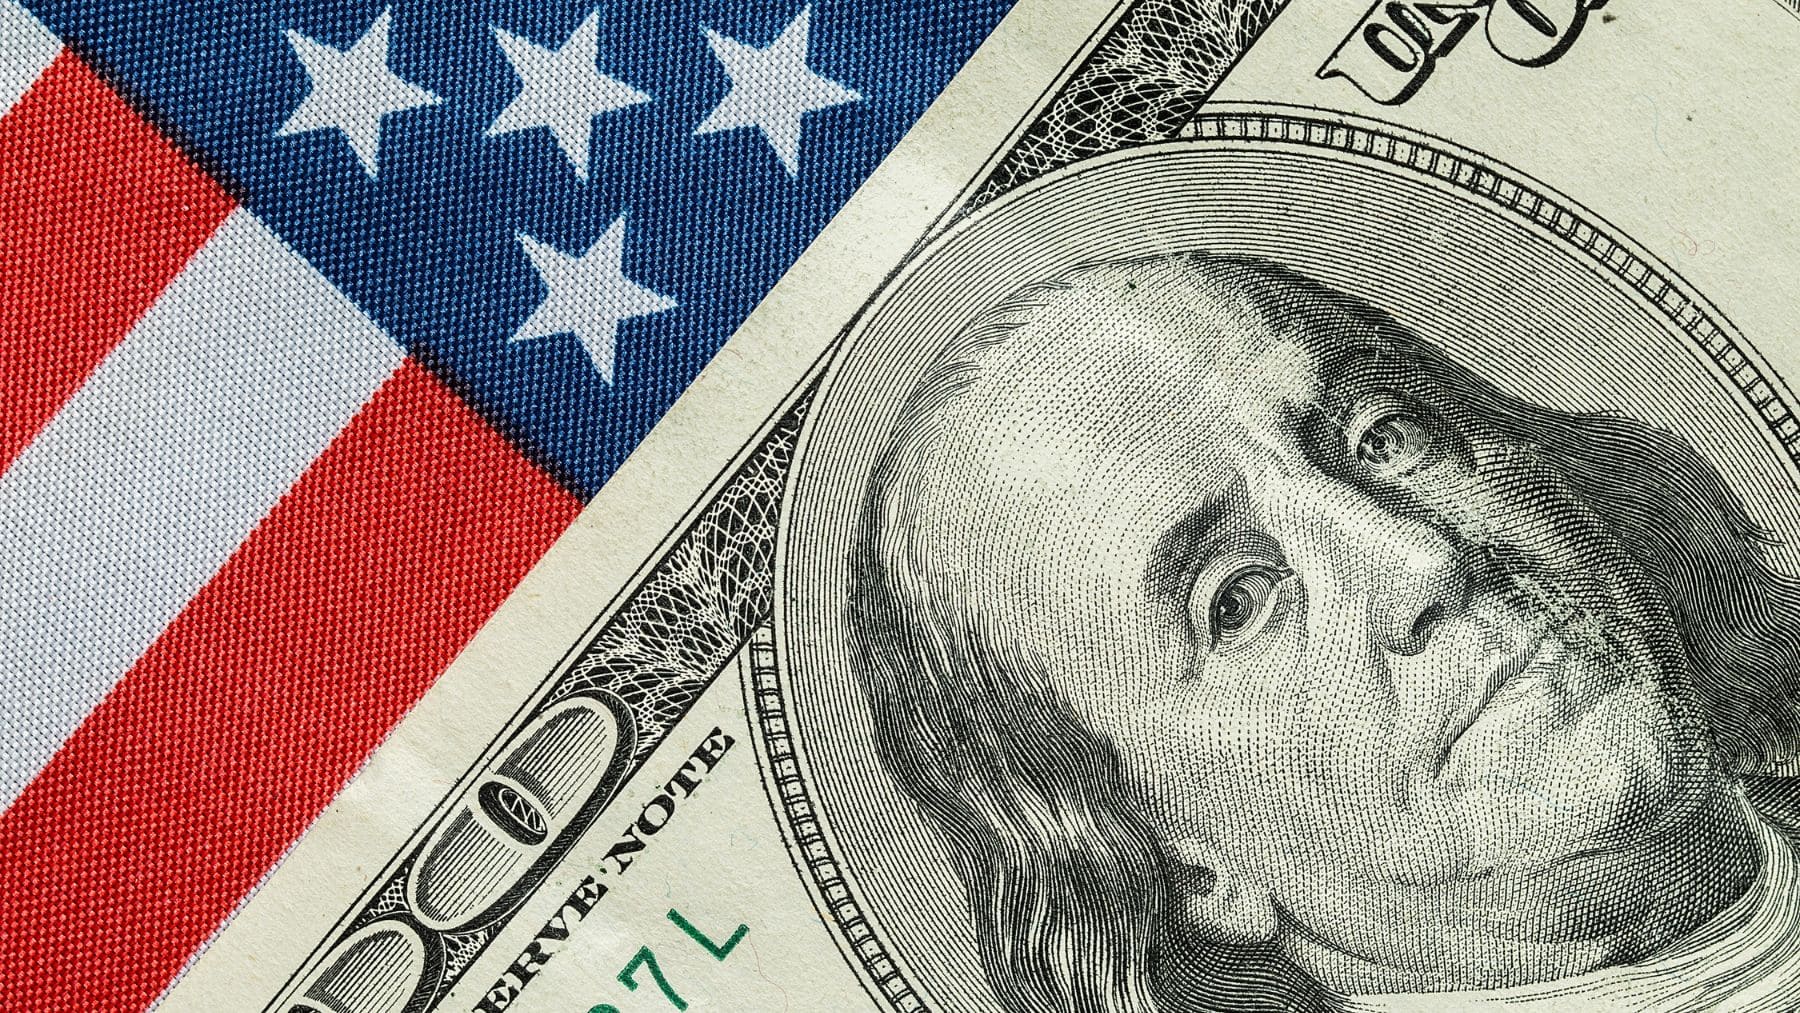 An American Flag with a Social Security payment